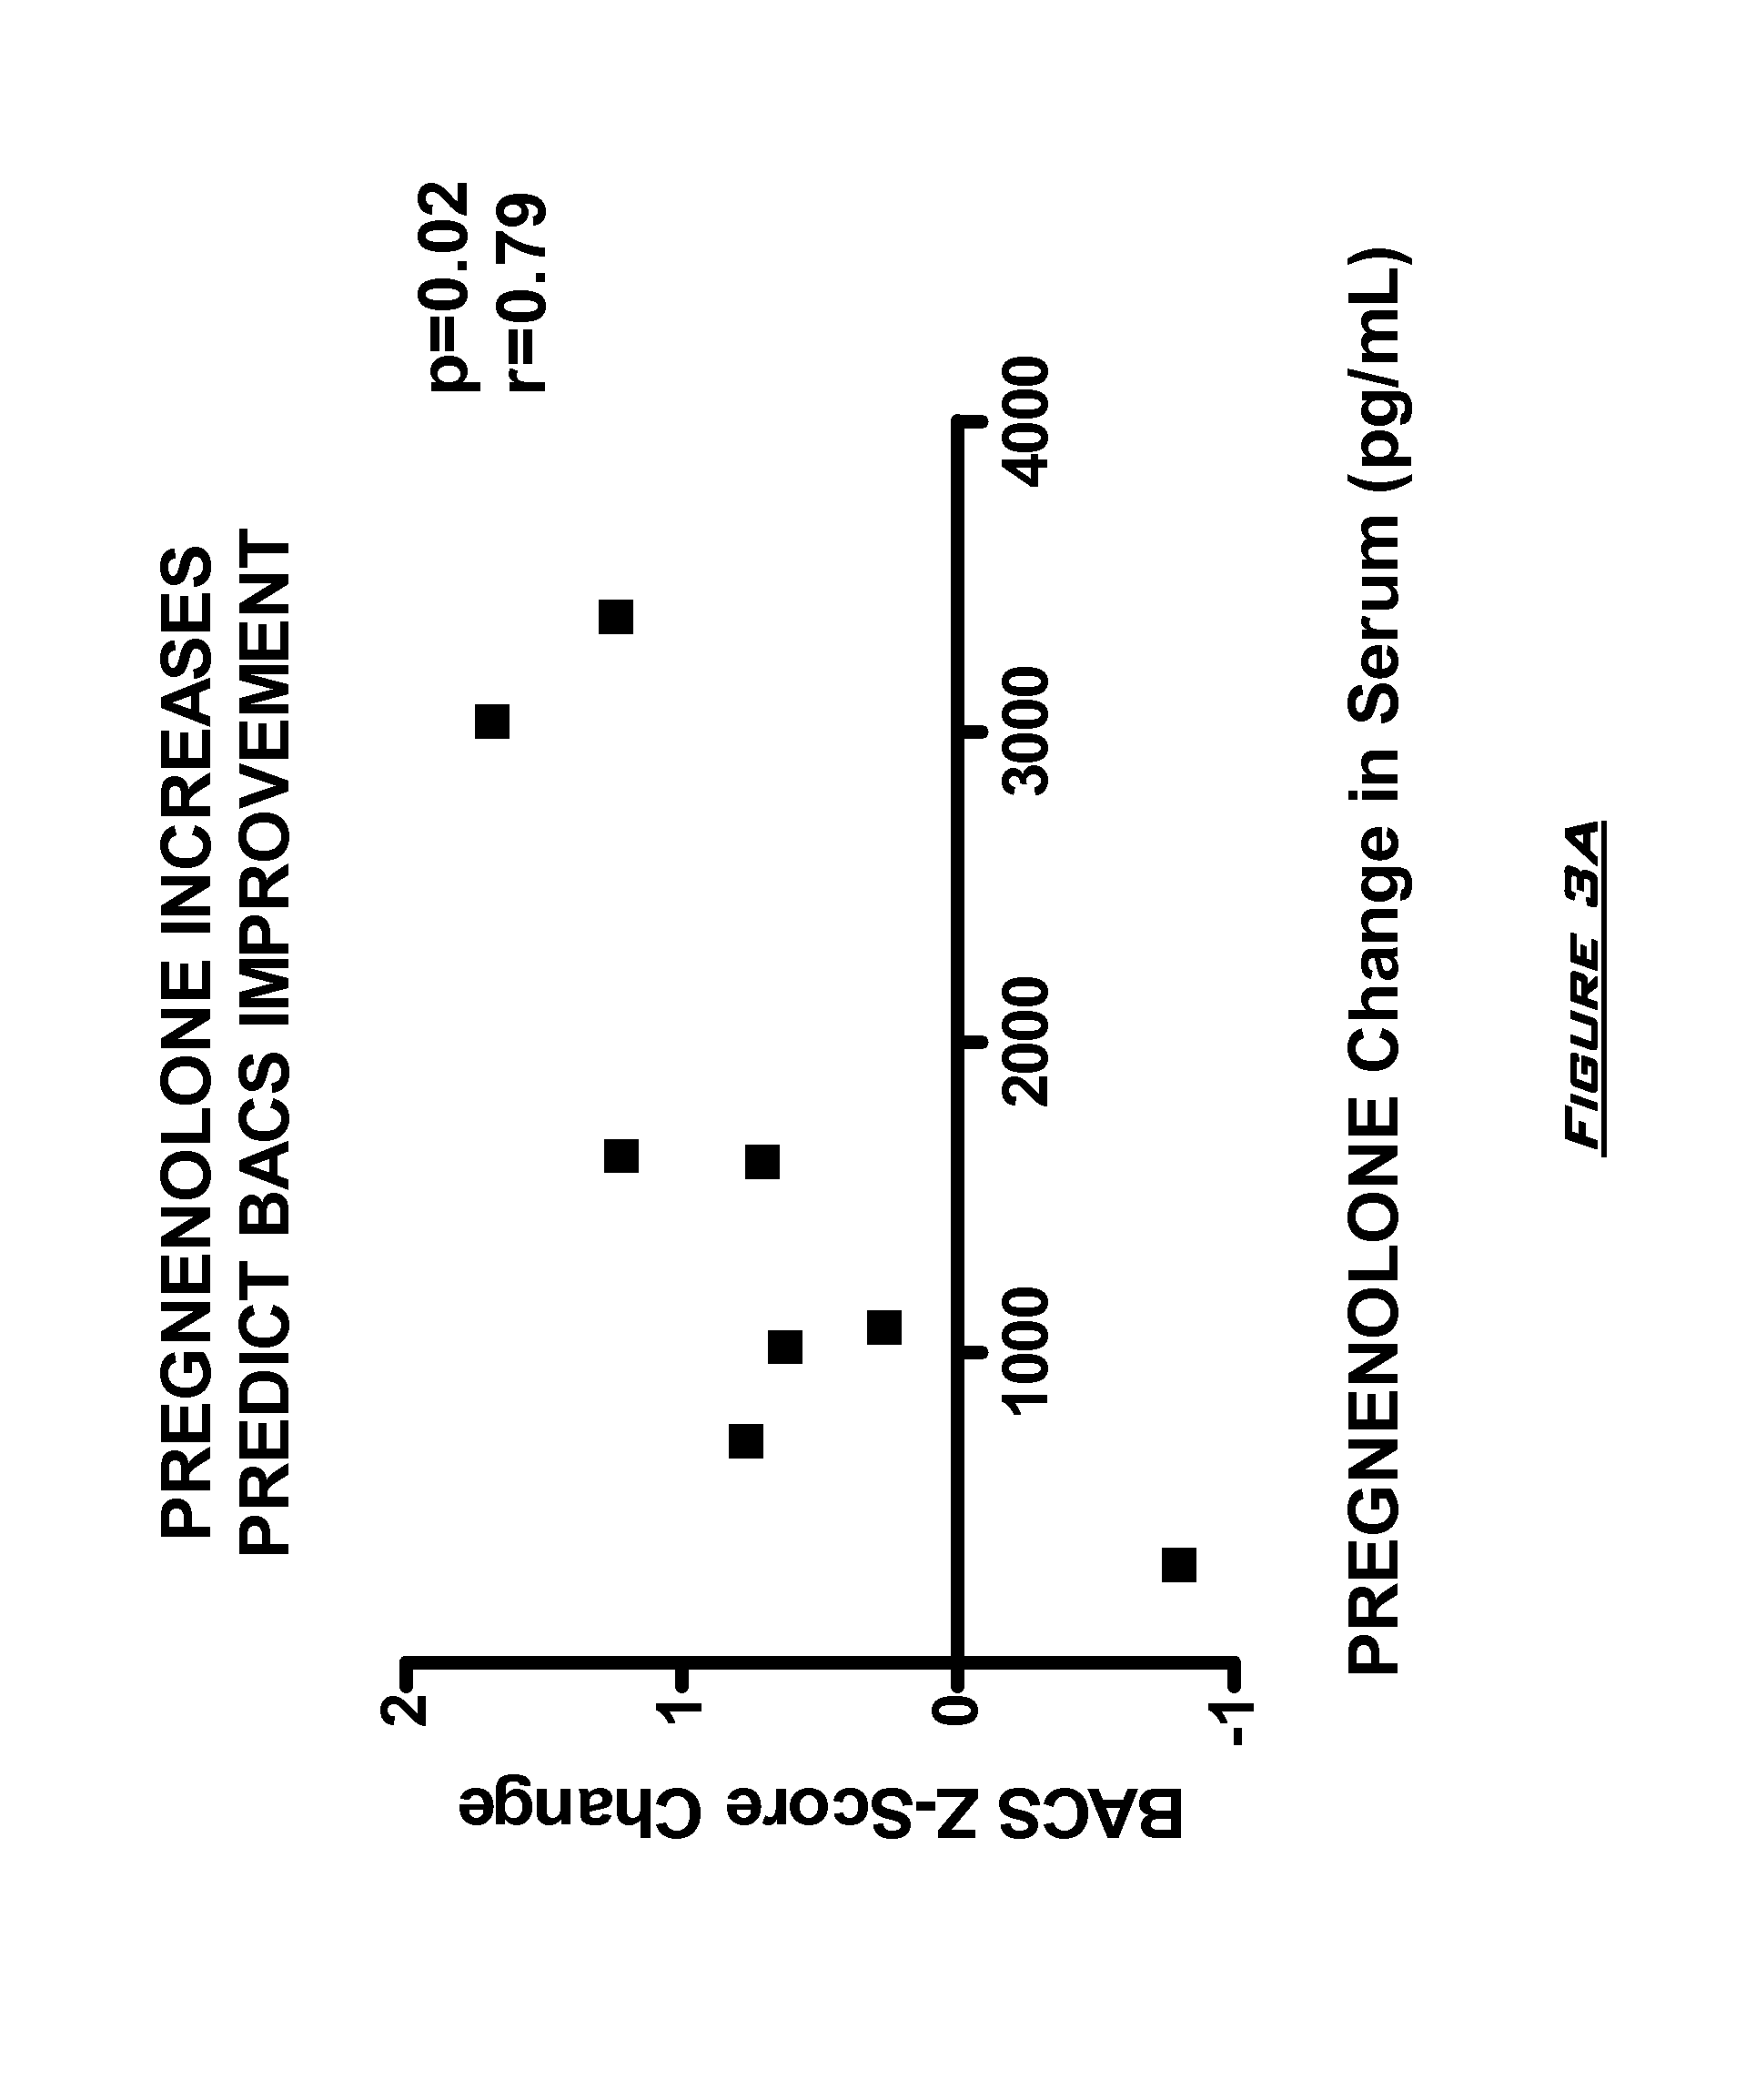 Neuroactive steroid compositions and methods of use therefor